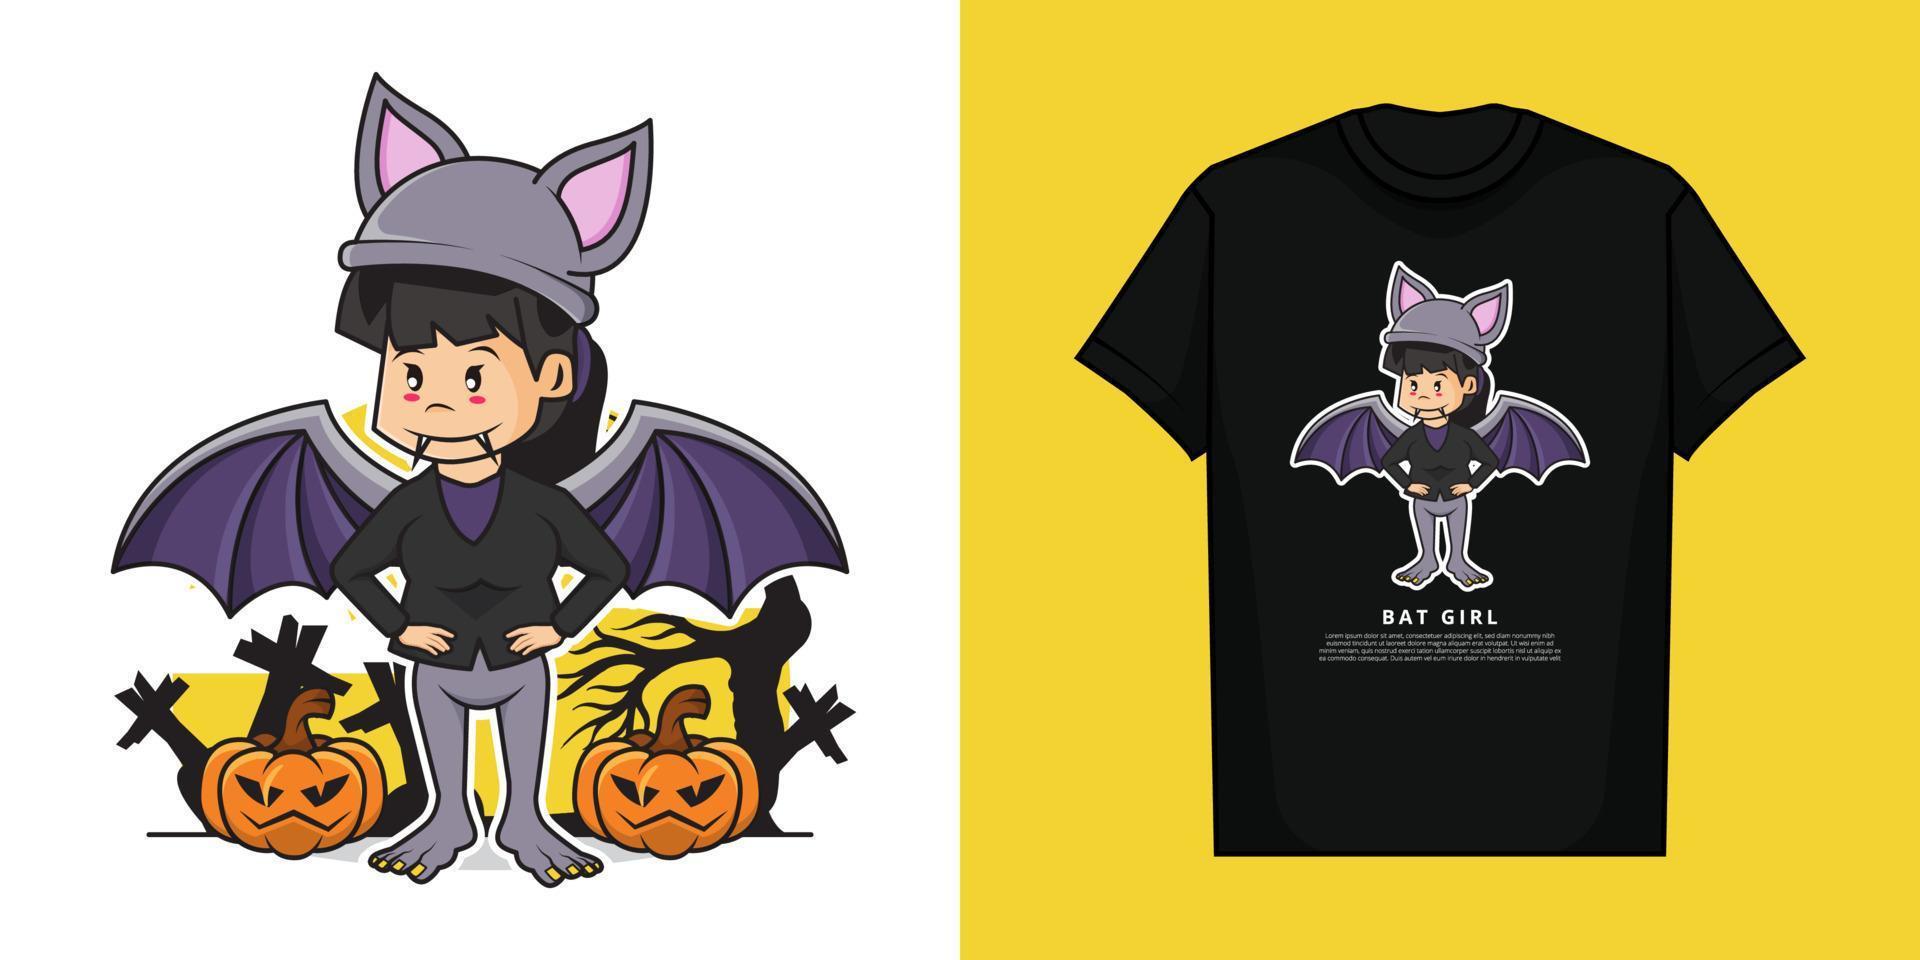 Illustration Vector Graphic of Cute Girl Wearing Bat Stealth Costume in the Halloween Days with T-Shirt Design